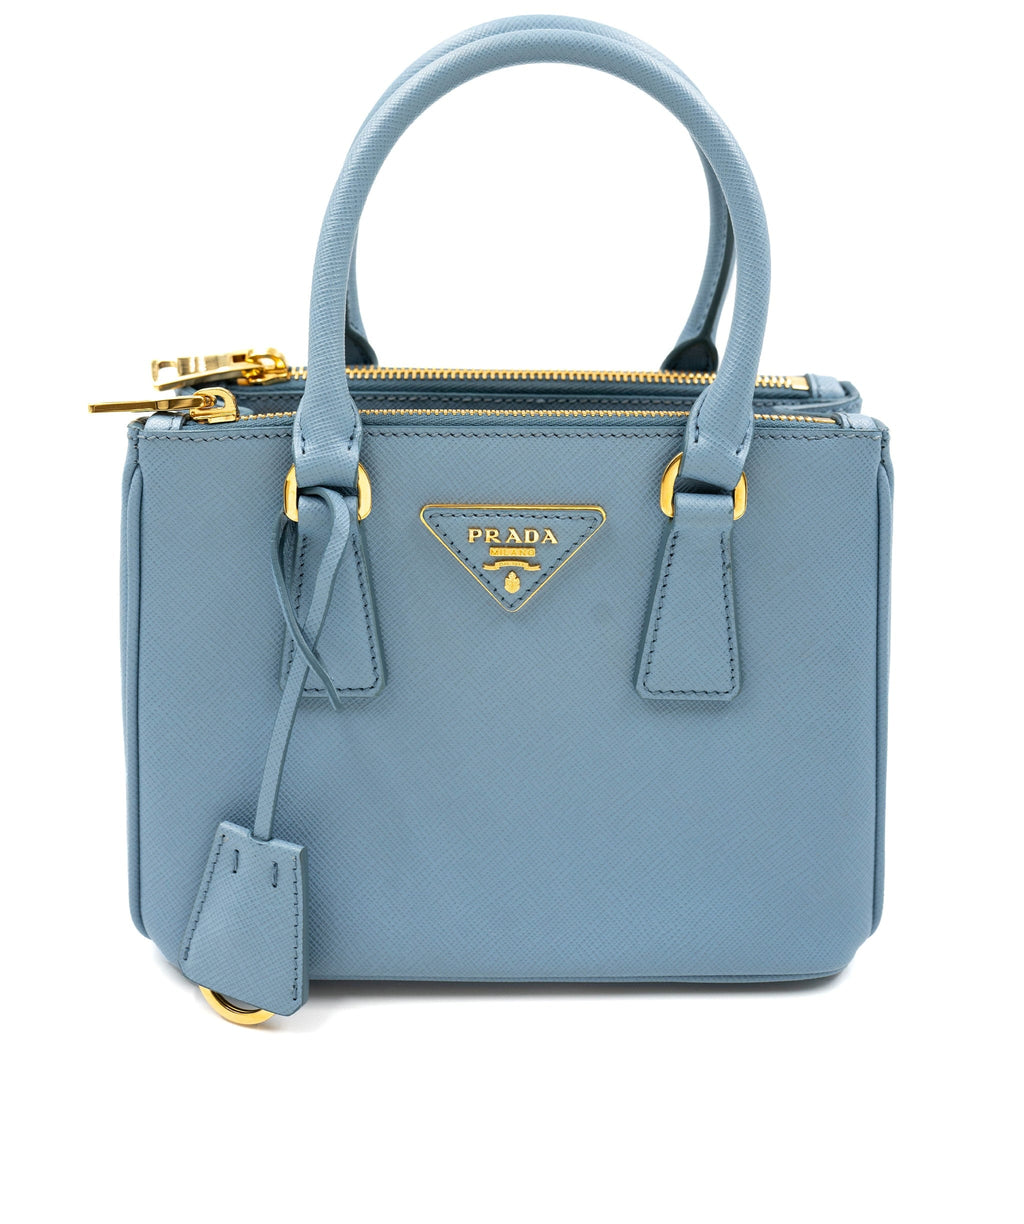 PRADA, TWO SAFFIANO LEATHER GALLERIA TOTE BAGS IN BLUE AND IN GREEN UNIQUE  COLORS NOT IN THE STORES, Prada: Tools of Memory, 2020